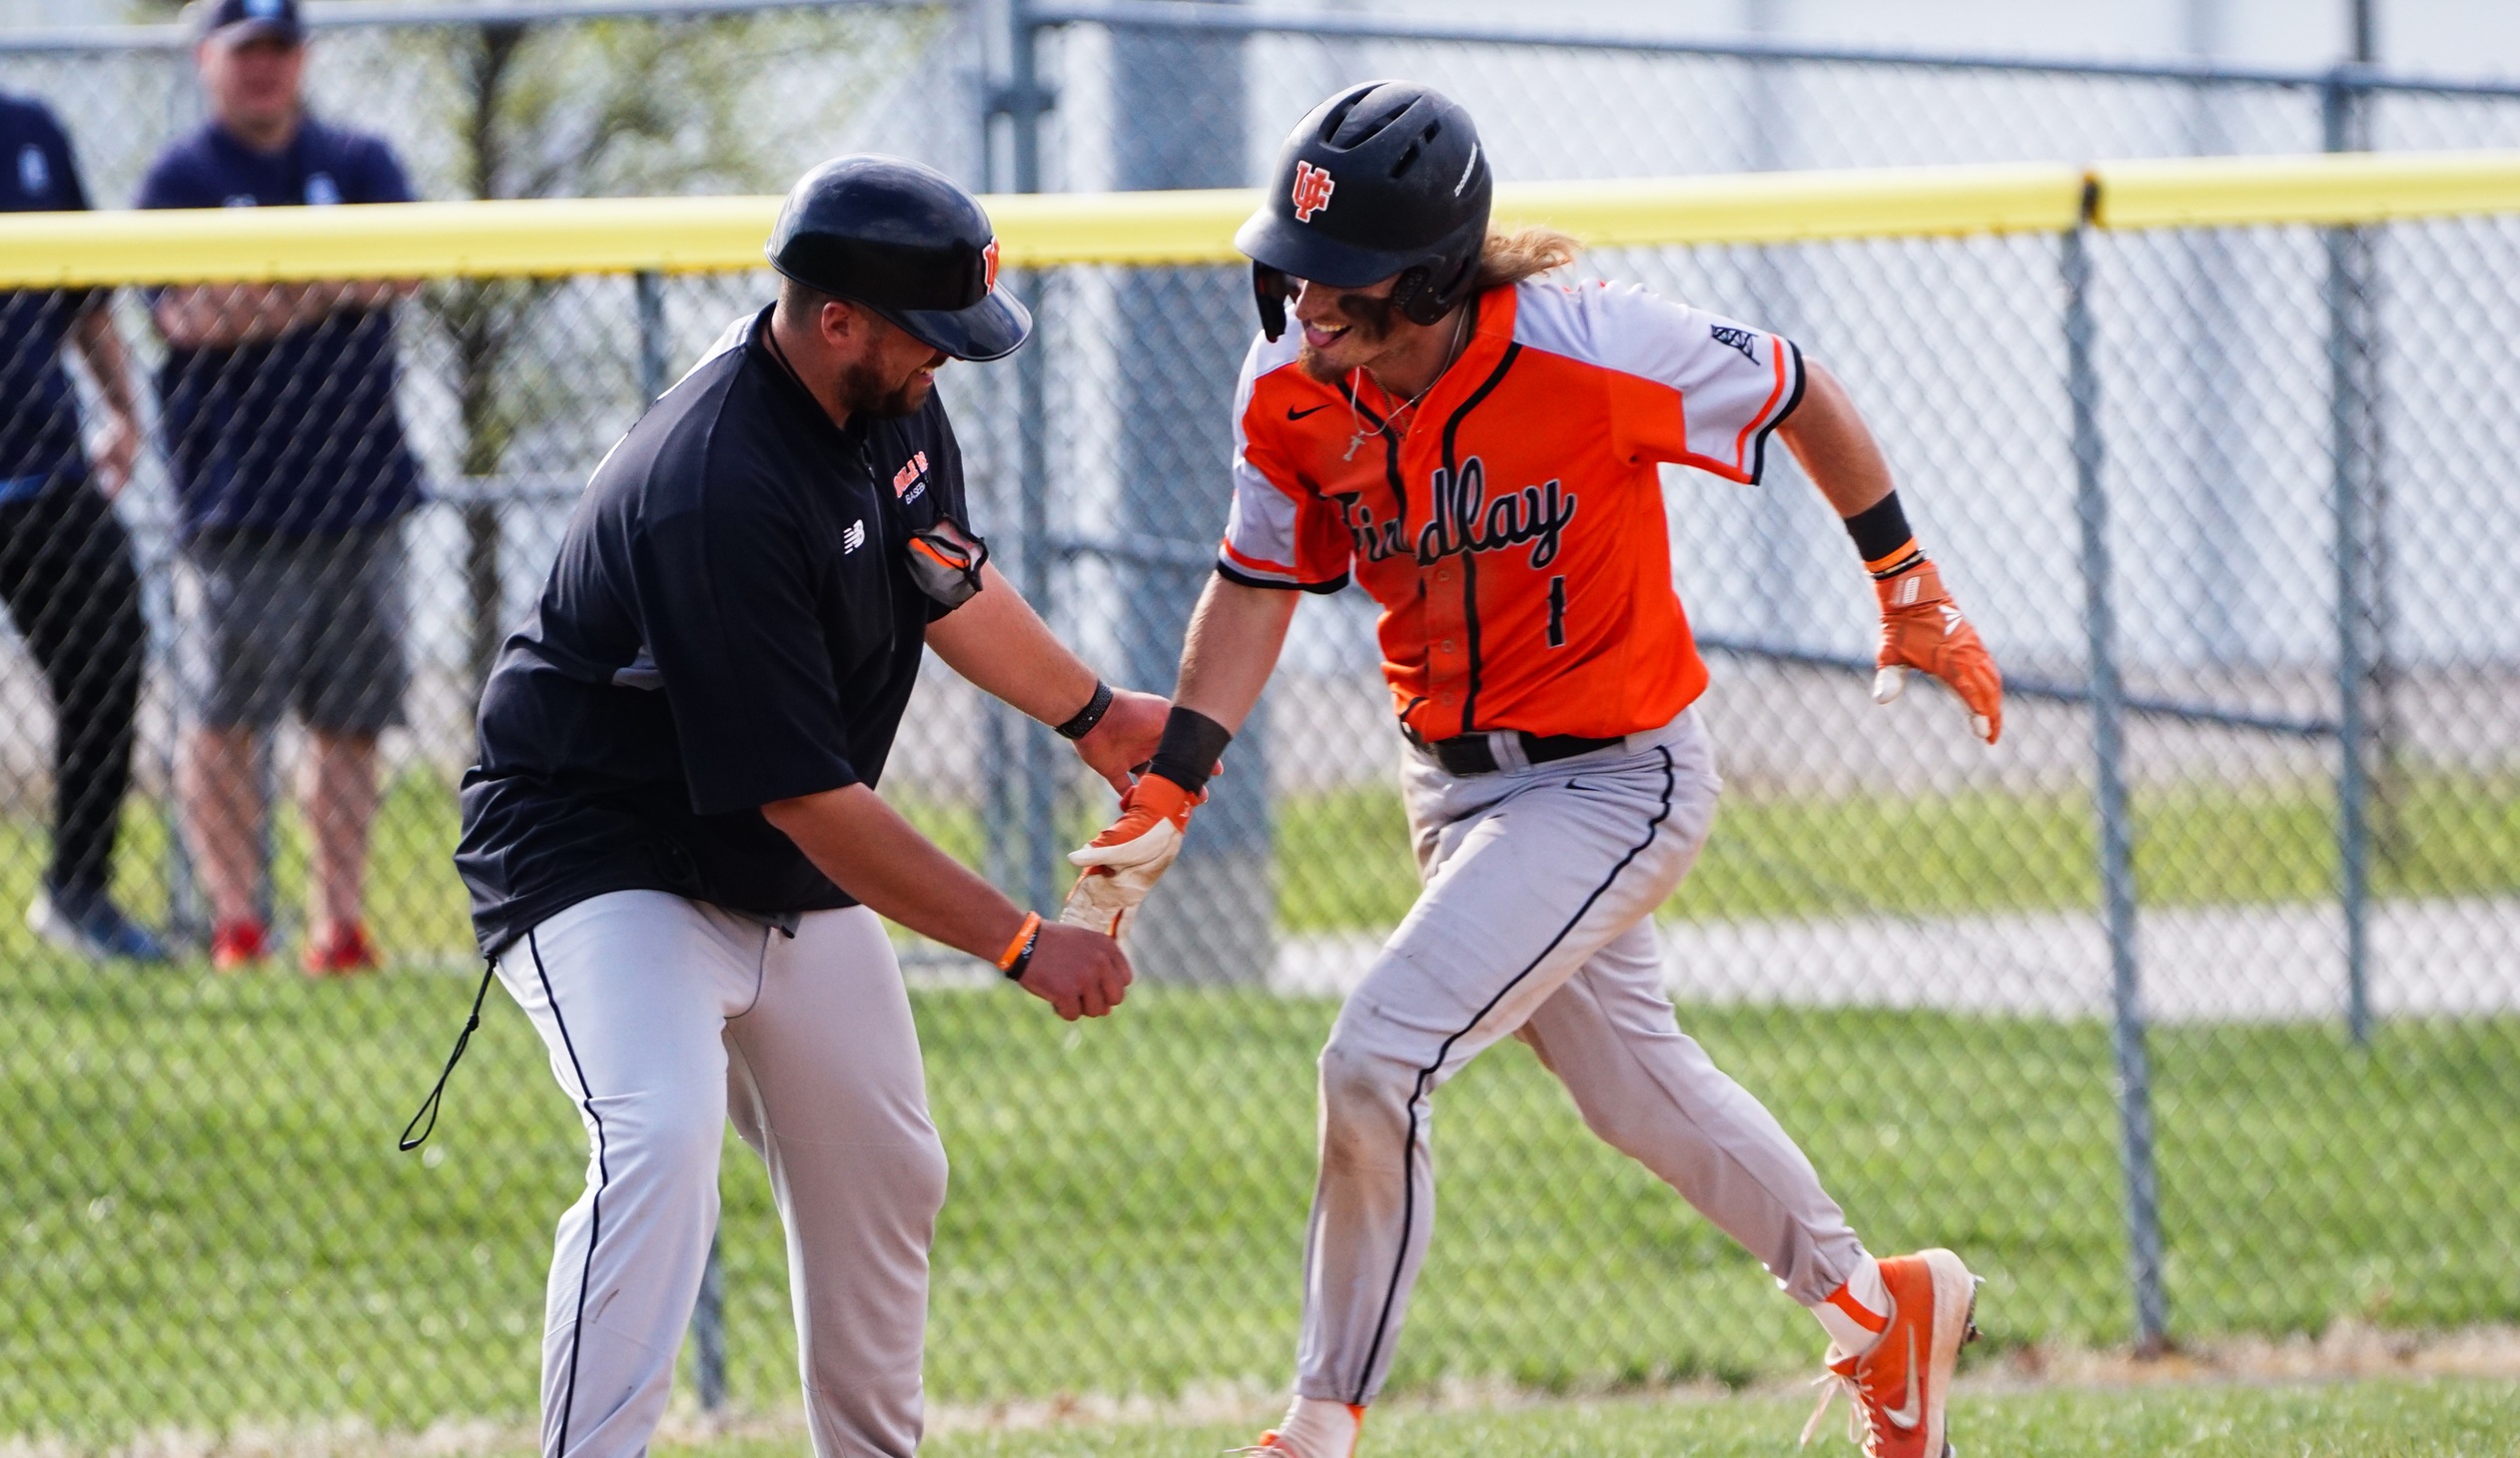 Findlay Splits with Tiffin to Begin Final Home Series of the Season